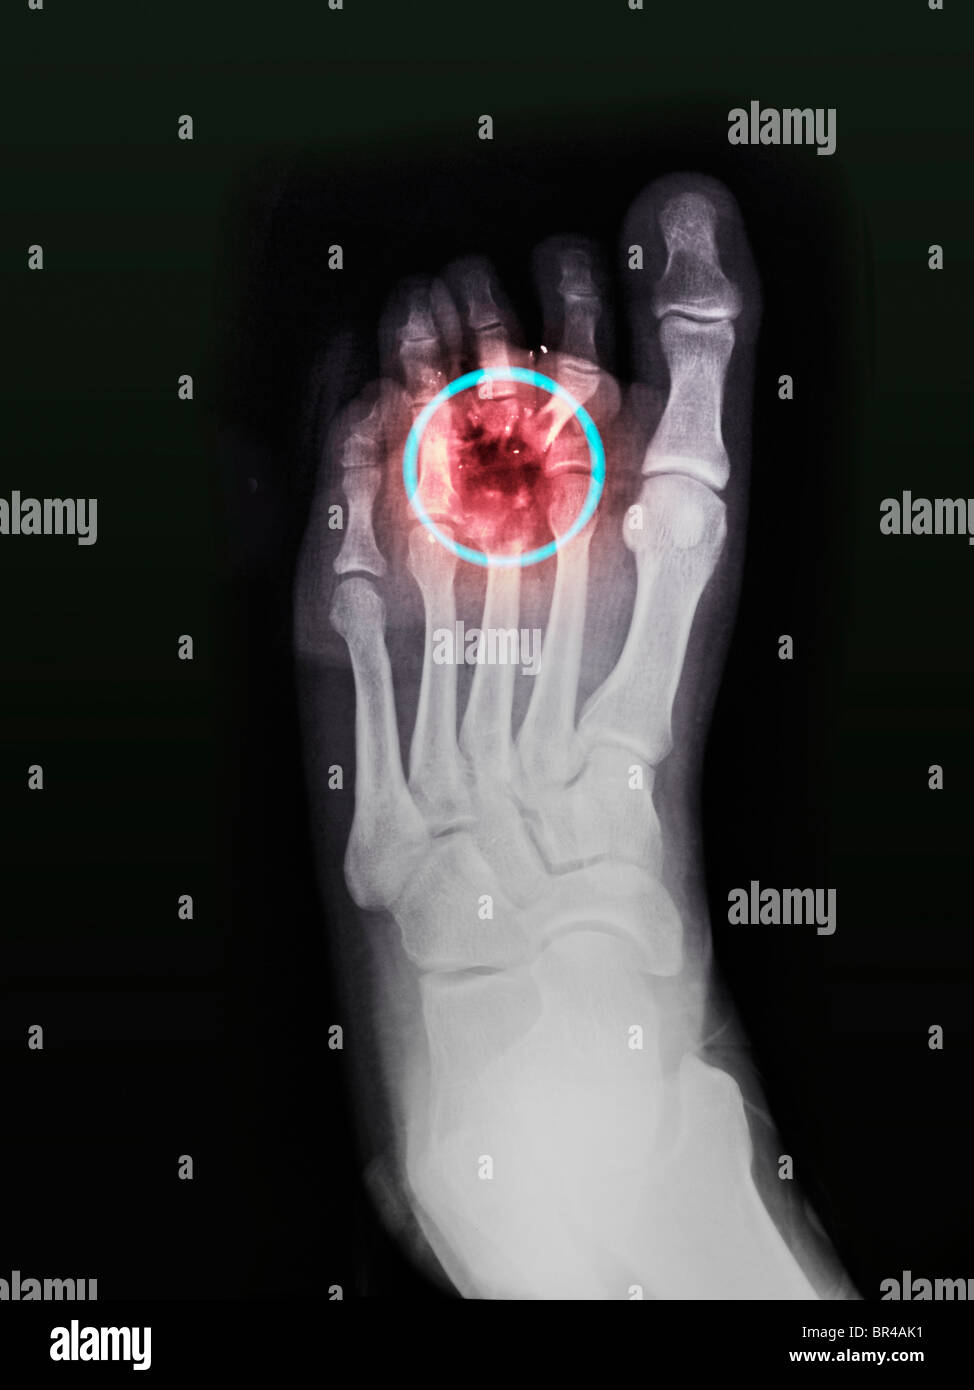 foot-x-ray-of-a-34-year-old-man-who-shot-himself-accidentally-in-the-BR4AK1.jpg